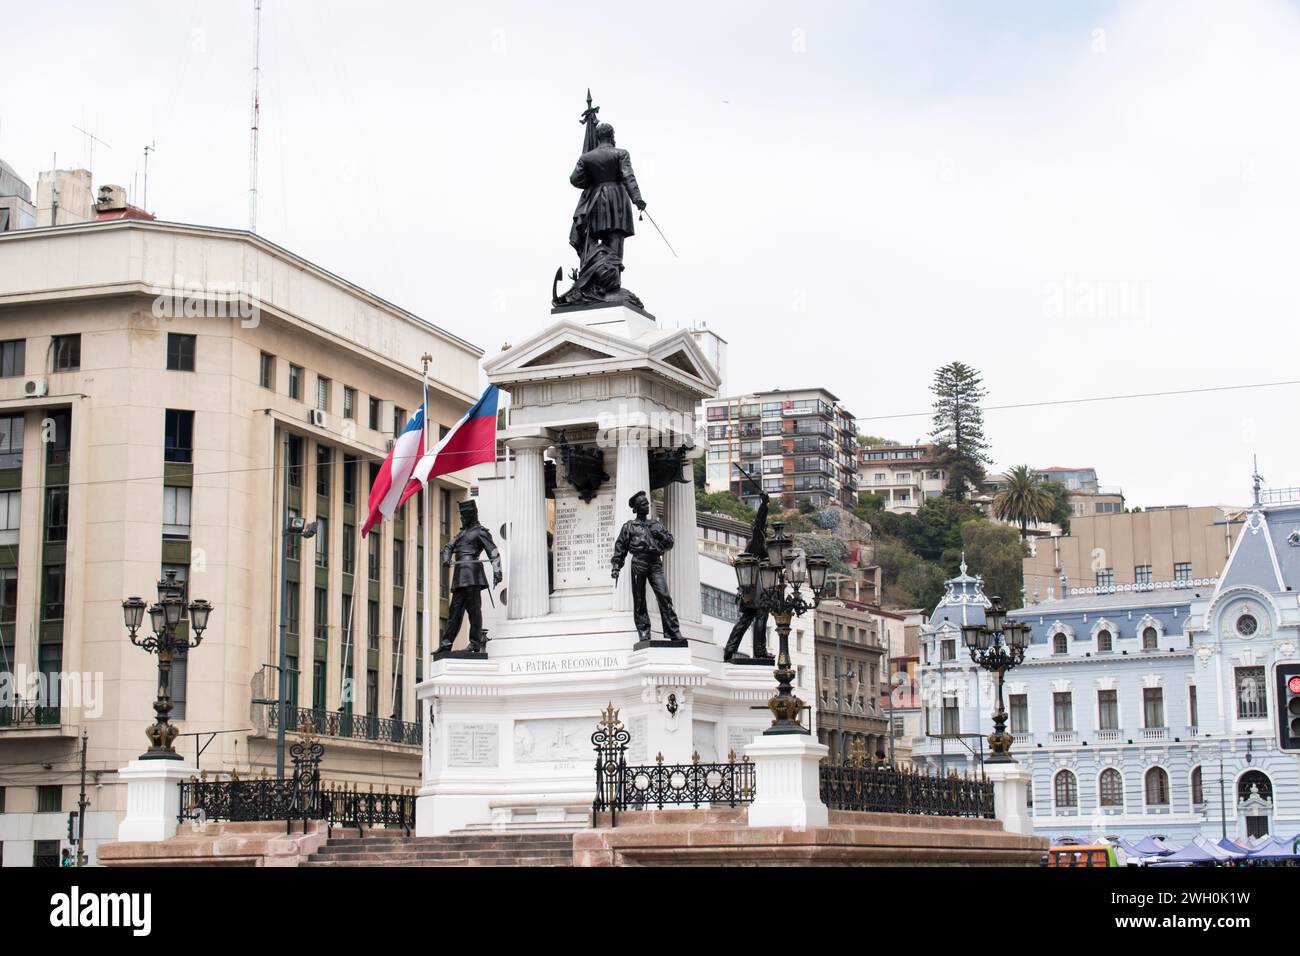 The Monument to the Heroes of Iquique located in Plaza Sotomayor, Valparaiso, commemorates the heroic actions of the Chilean naval officers. Stock Photo